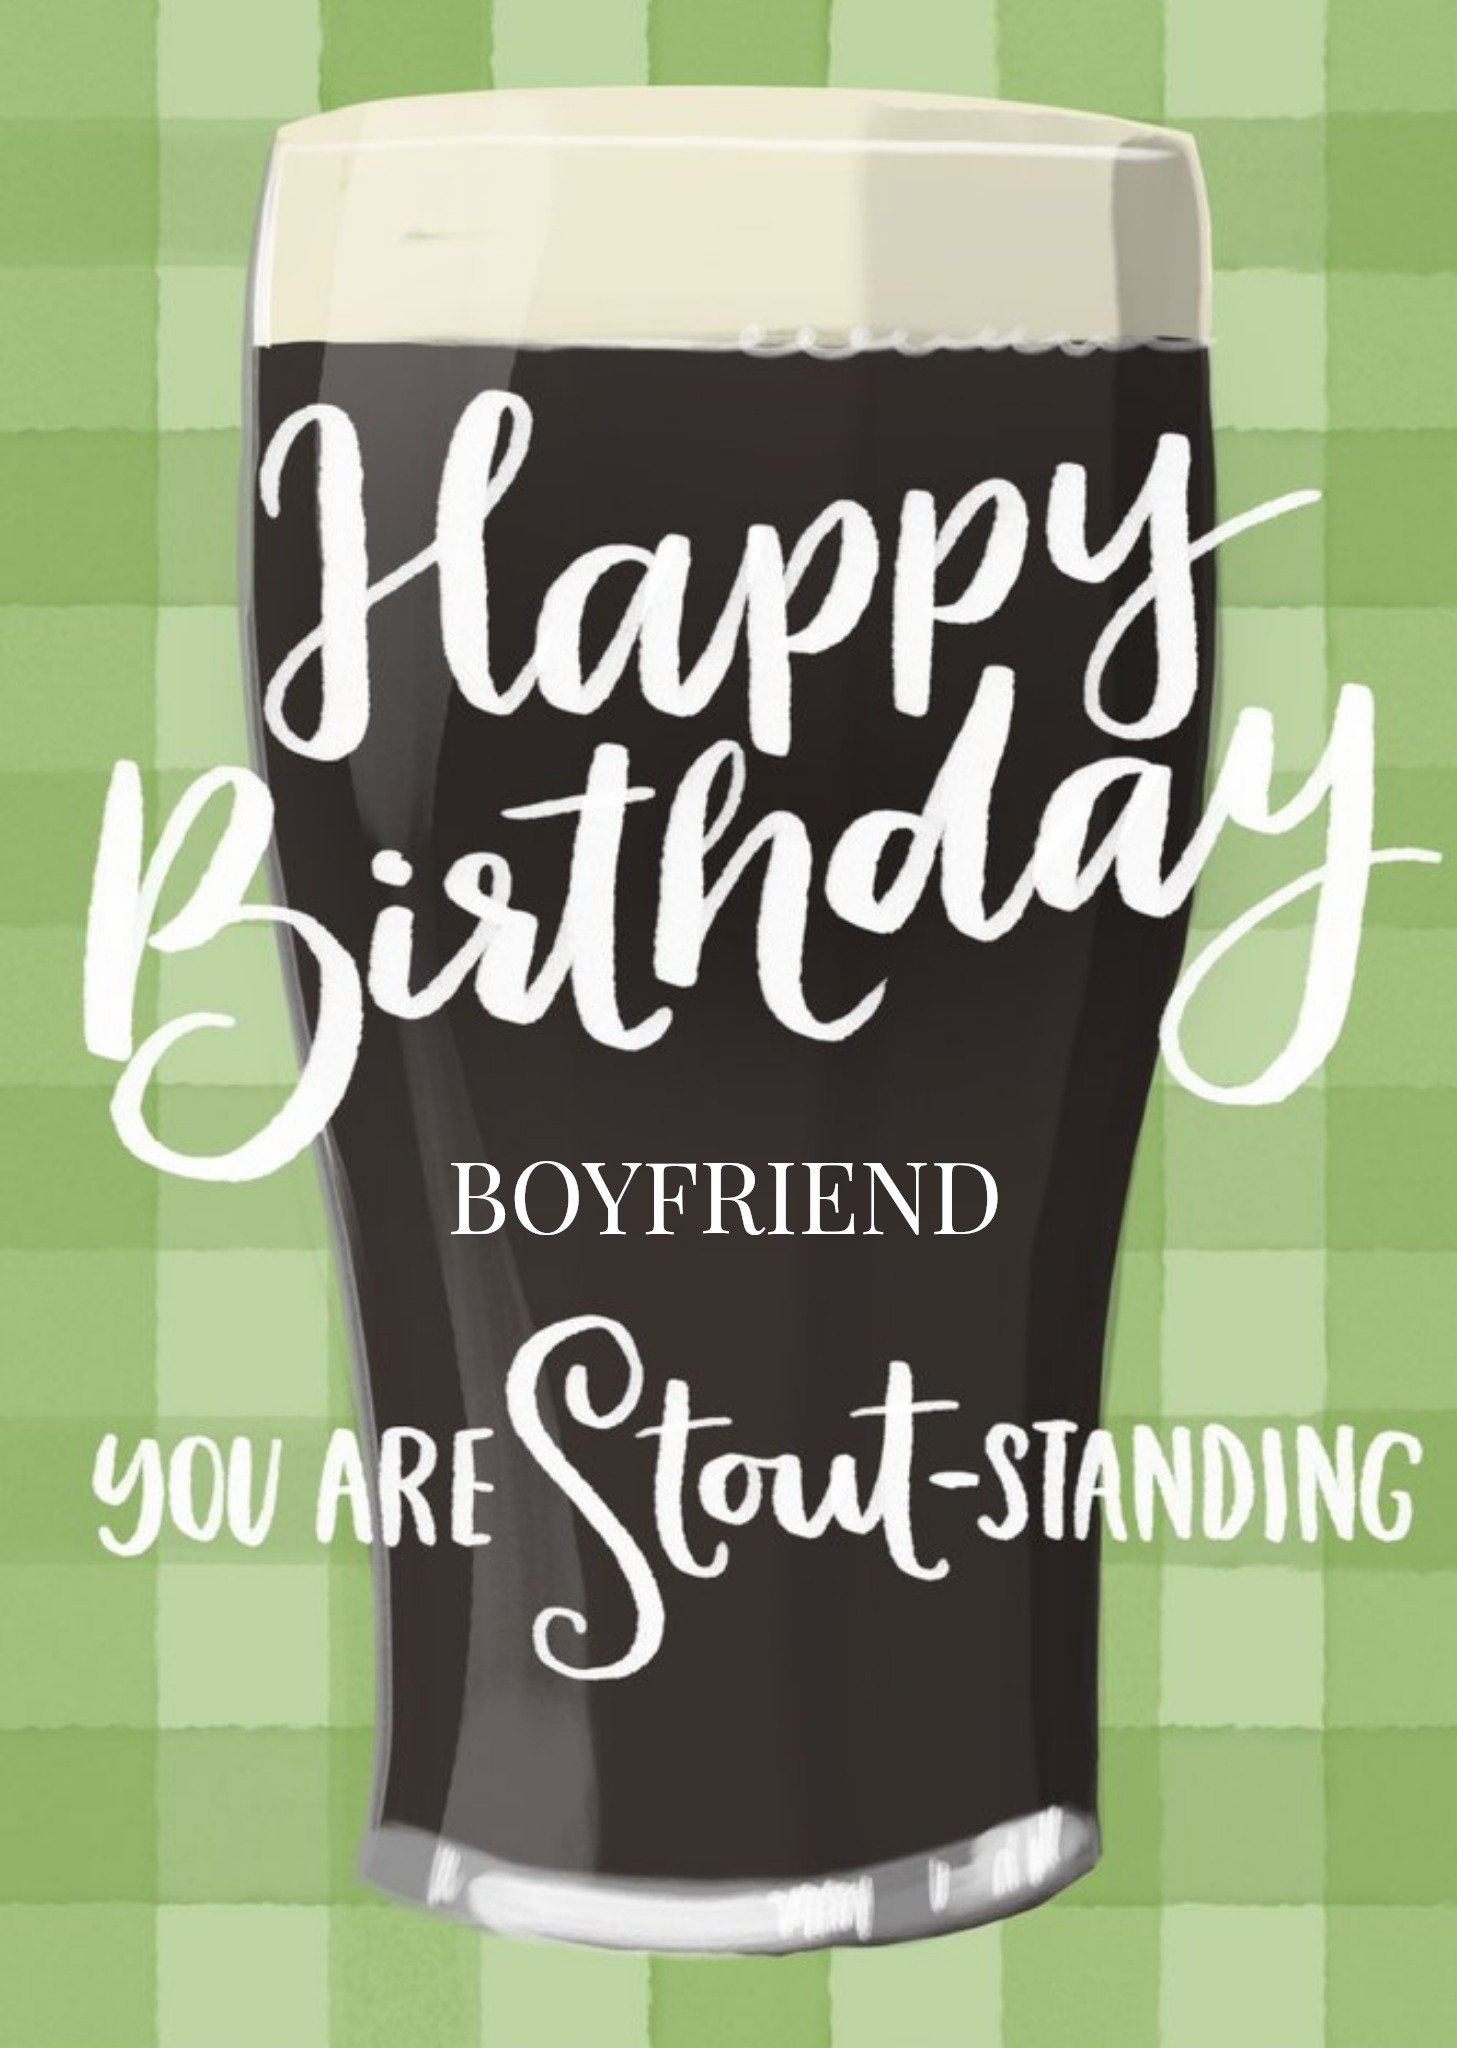 Moonpig Illustrated Stout-Standing Customisable Birthday Card, Large